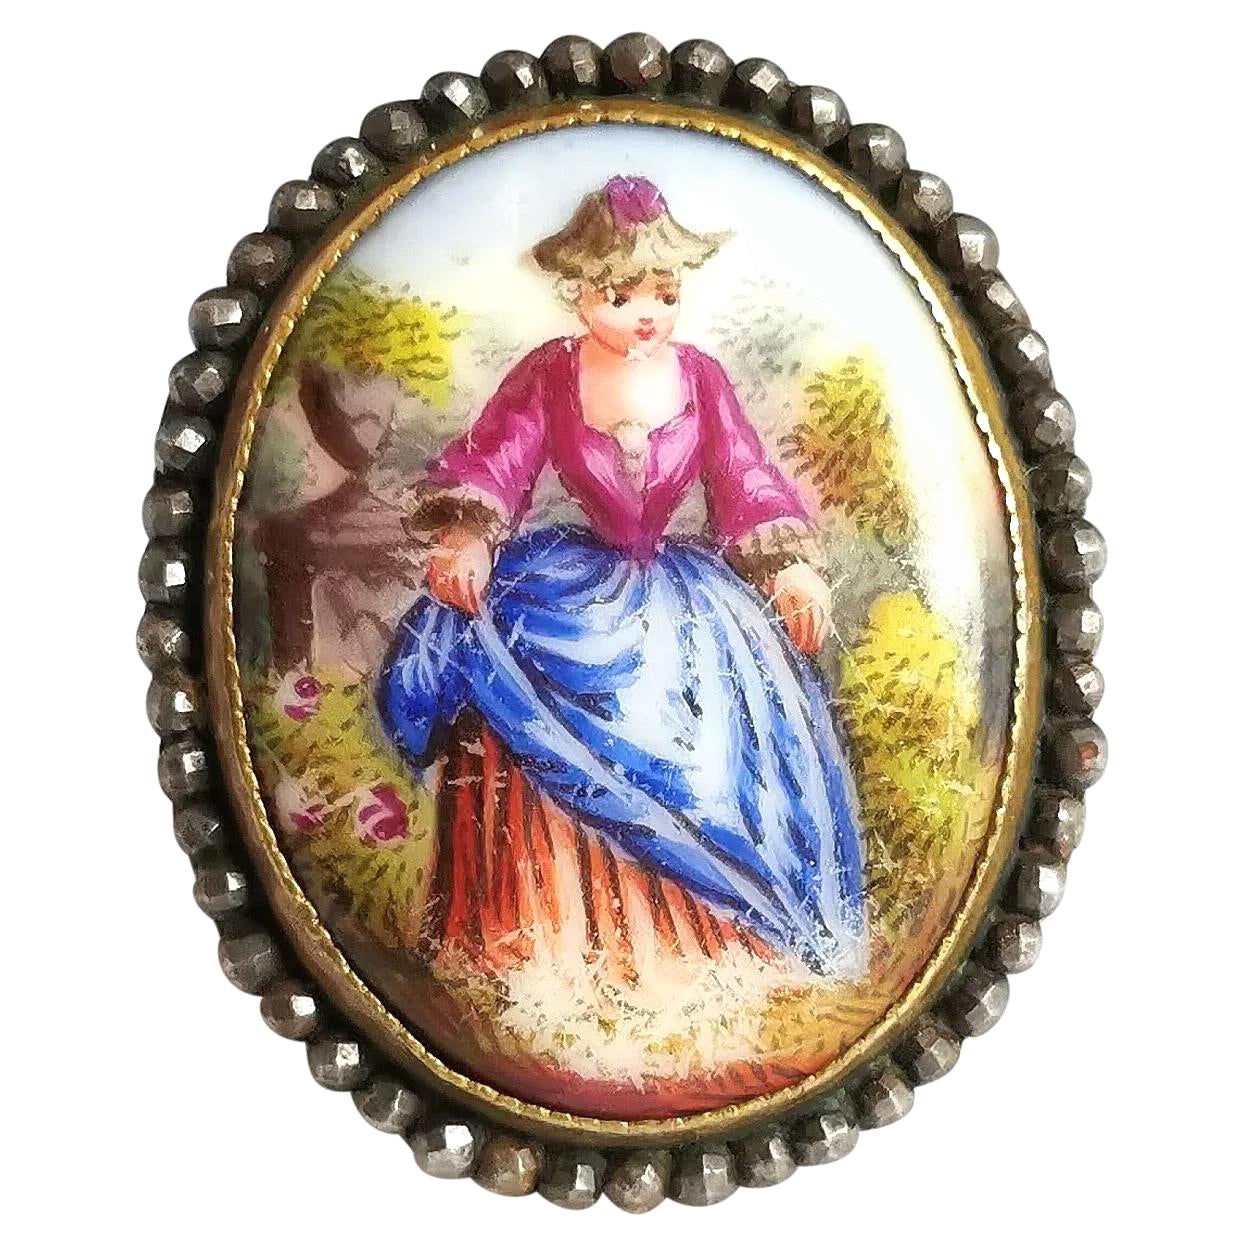 Antique Enamelled Portrait Ring, 9k Gold, Cut Steel and Mother of Pearl